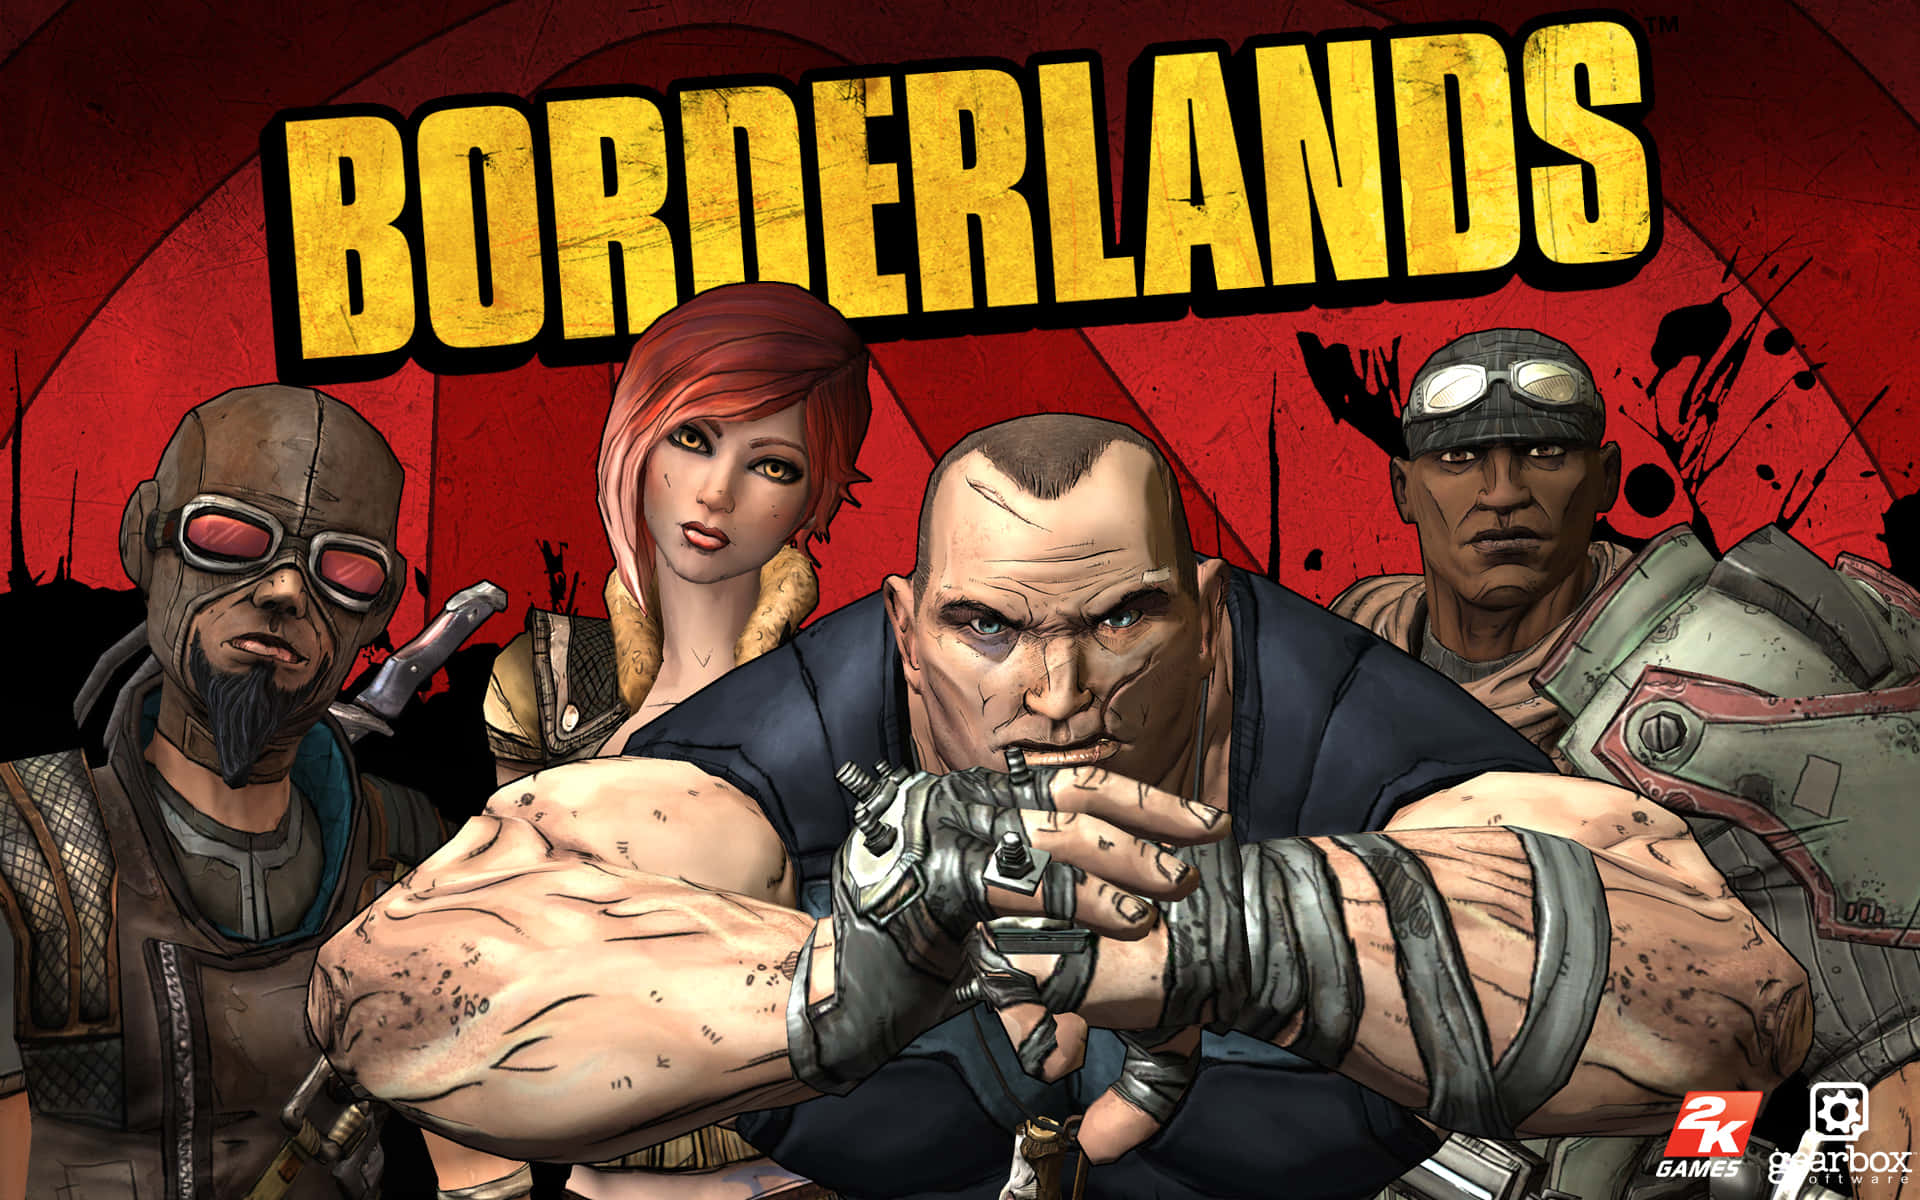 Epic action in the world of Borderlands